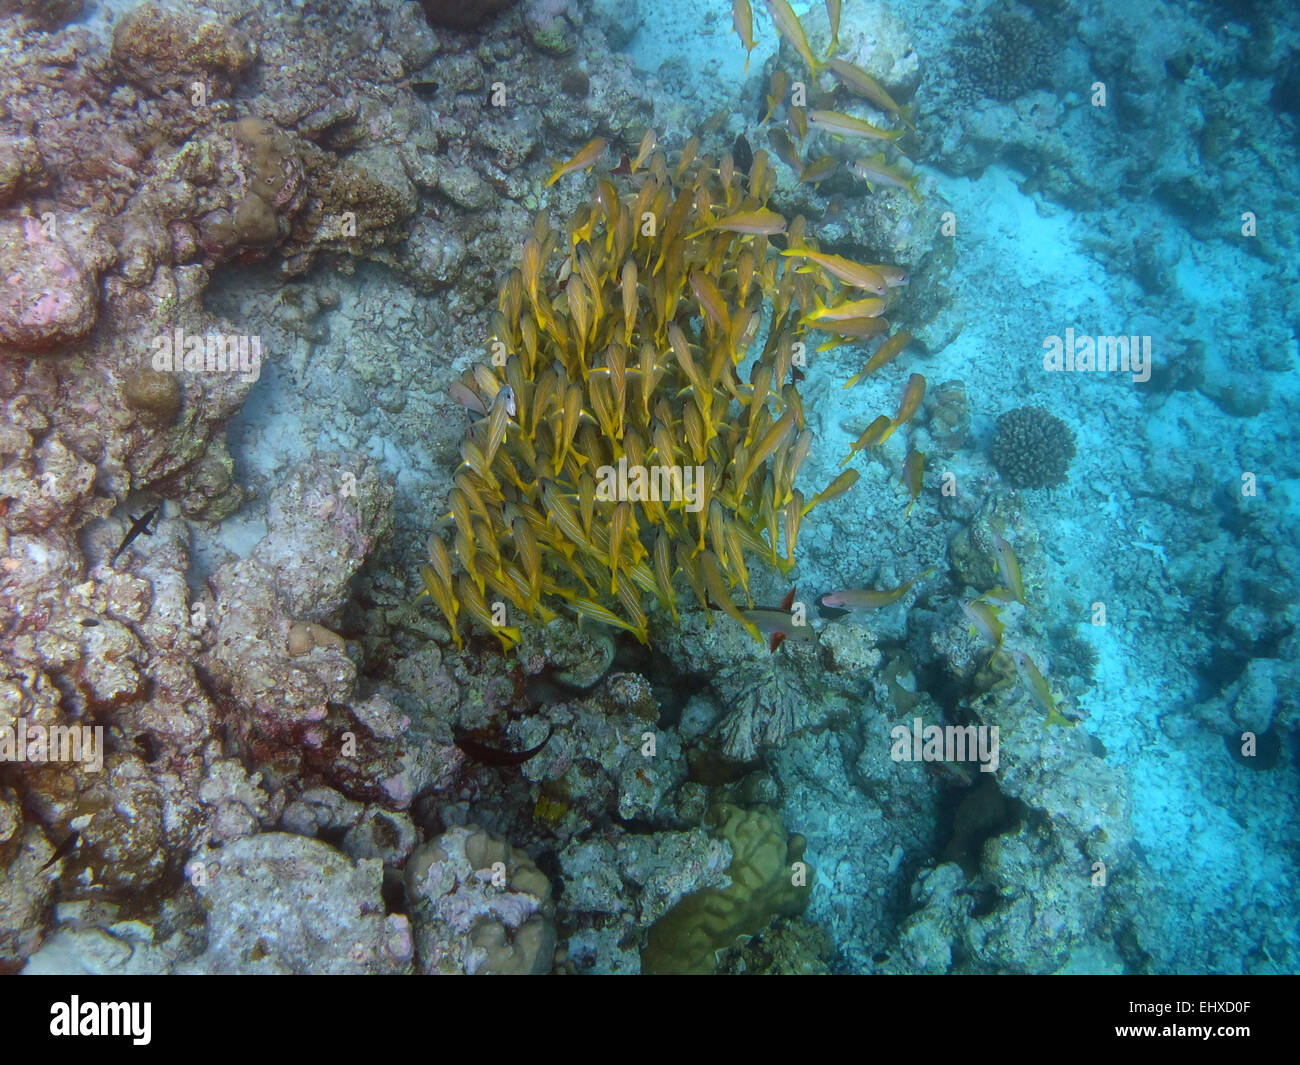 A shoal of Madras and Bengal Snappers sheltering on a coral reef in the Maldives Stock Photo